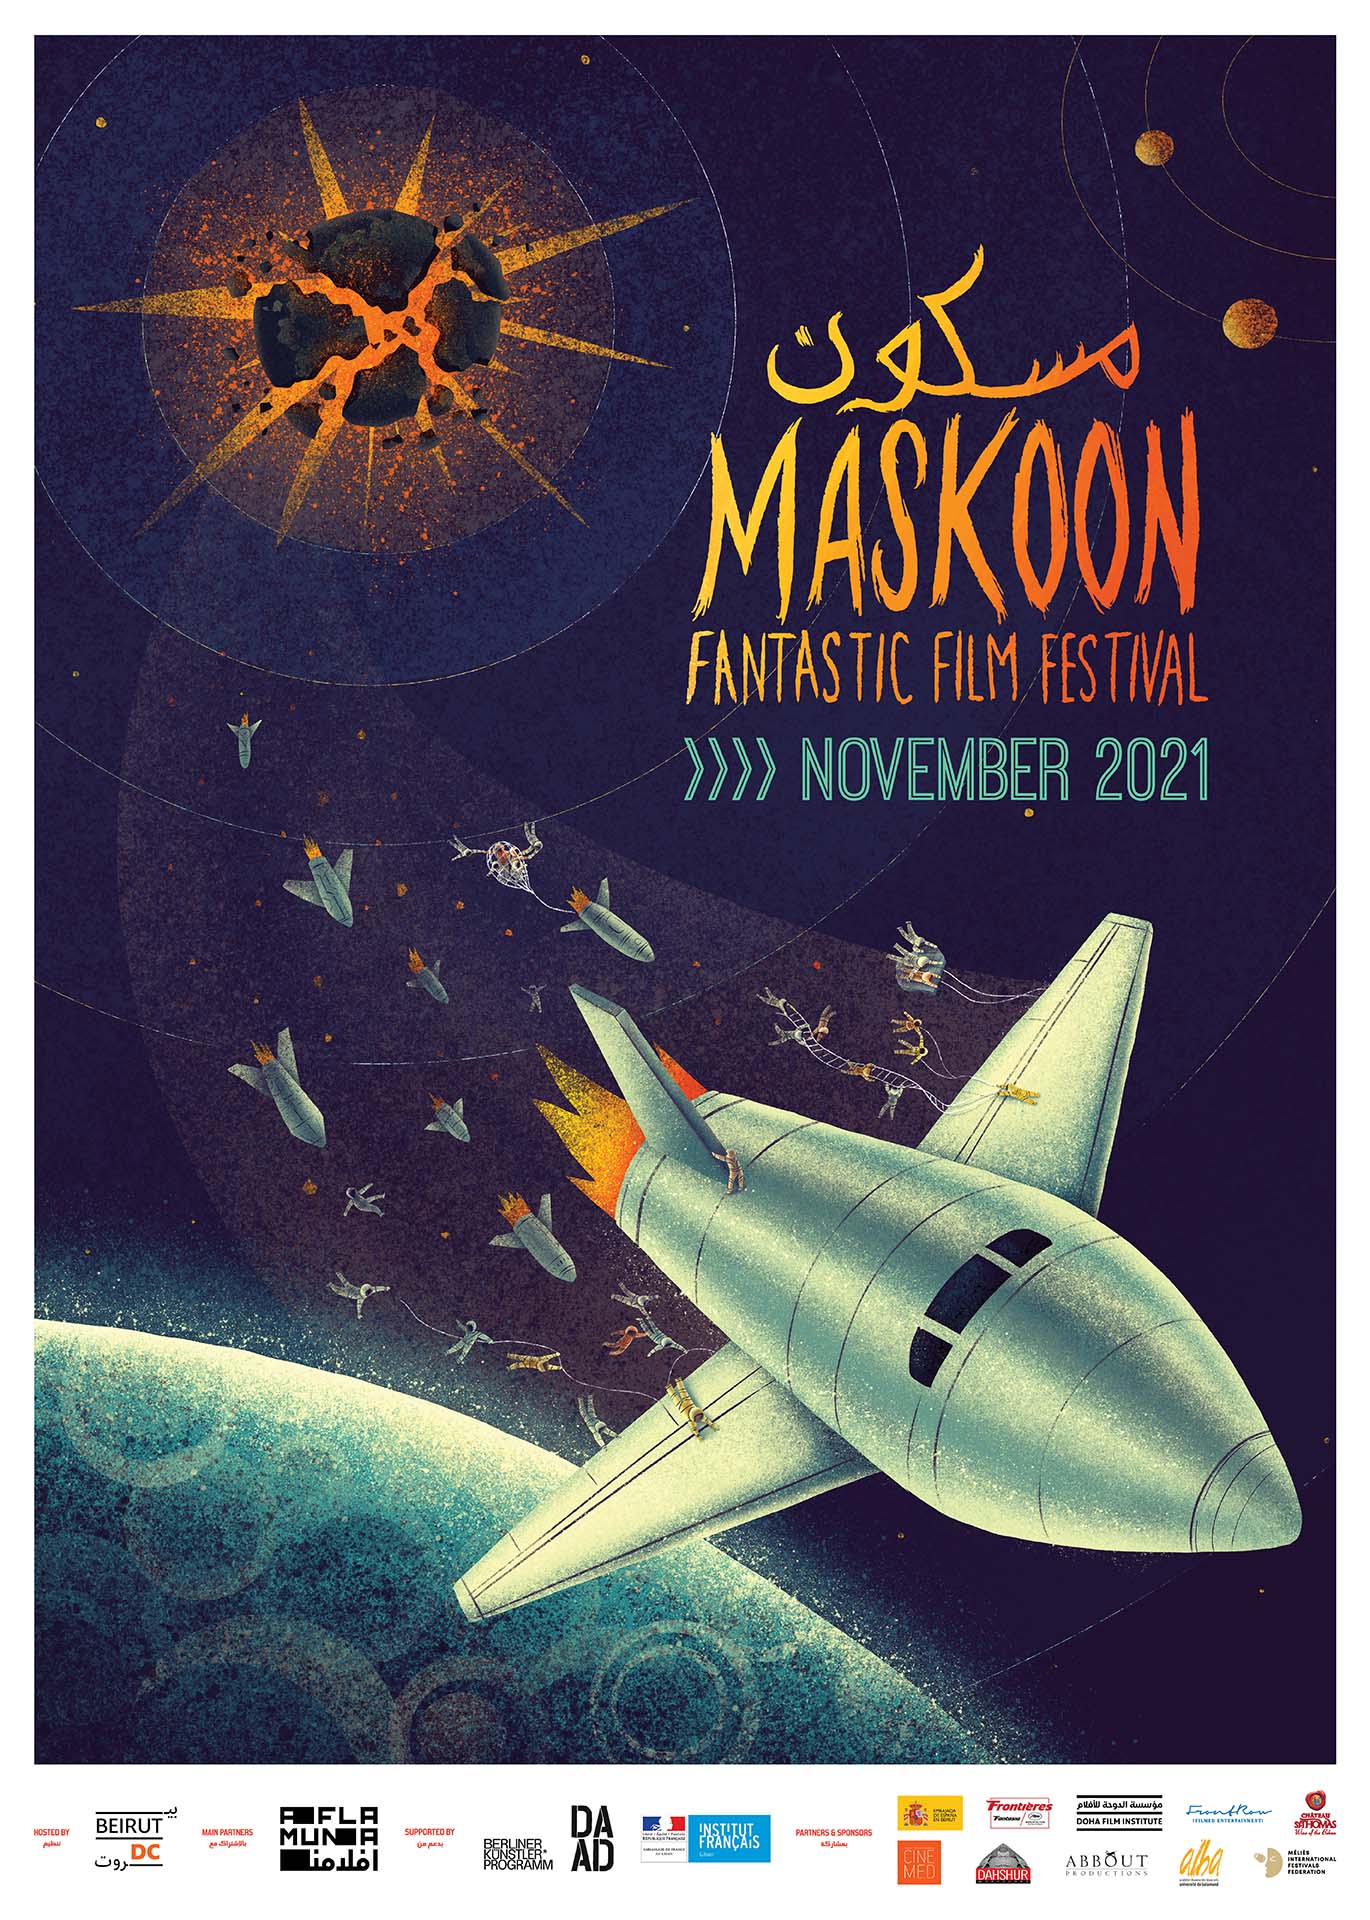 fifth edition of Lebanese's sci-fi and horror film festival, Maskoon.